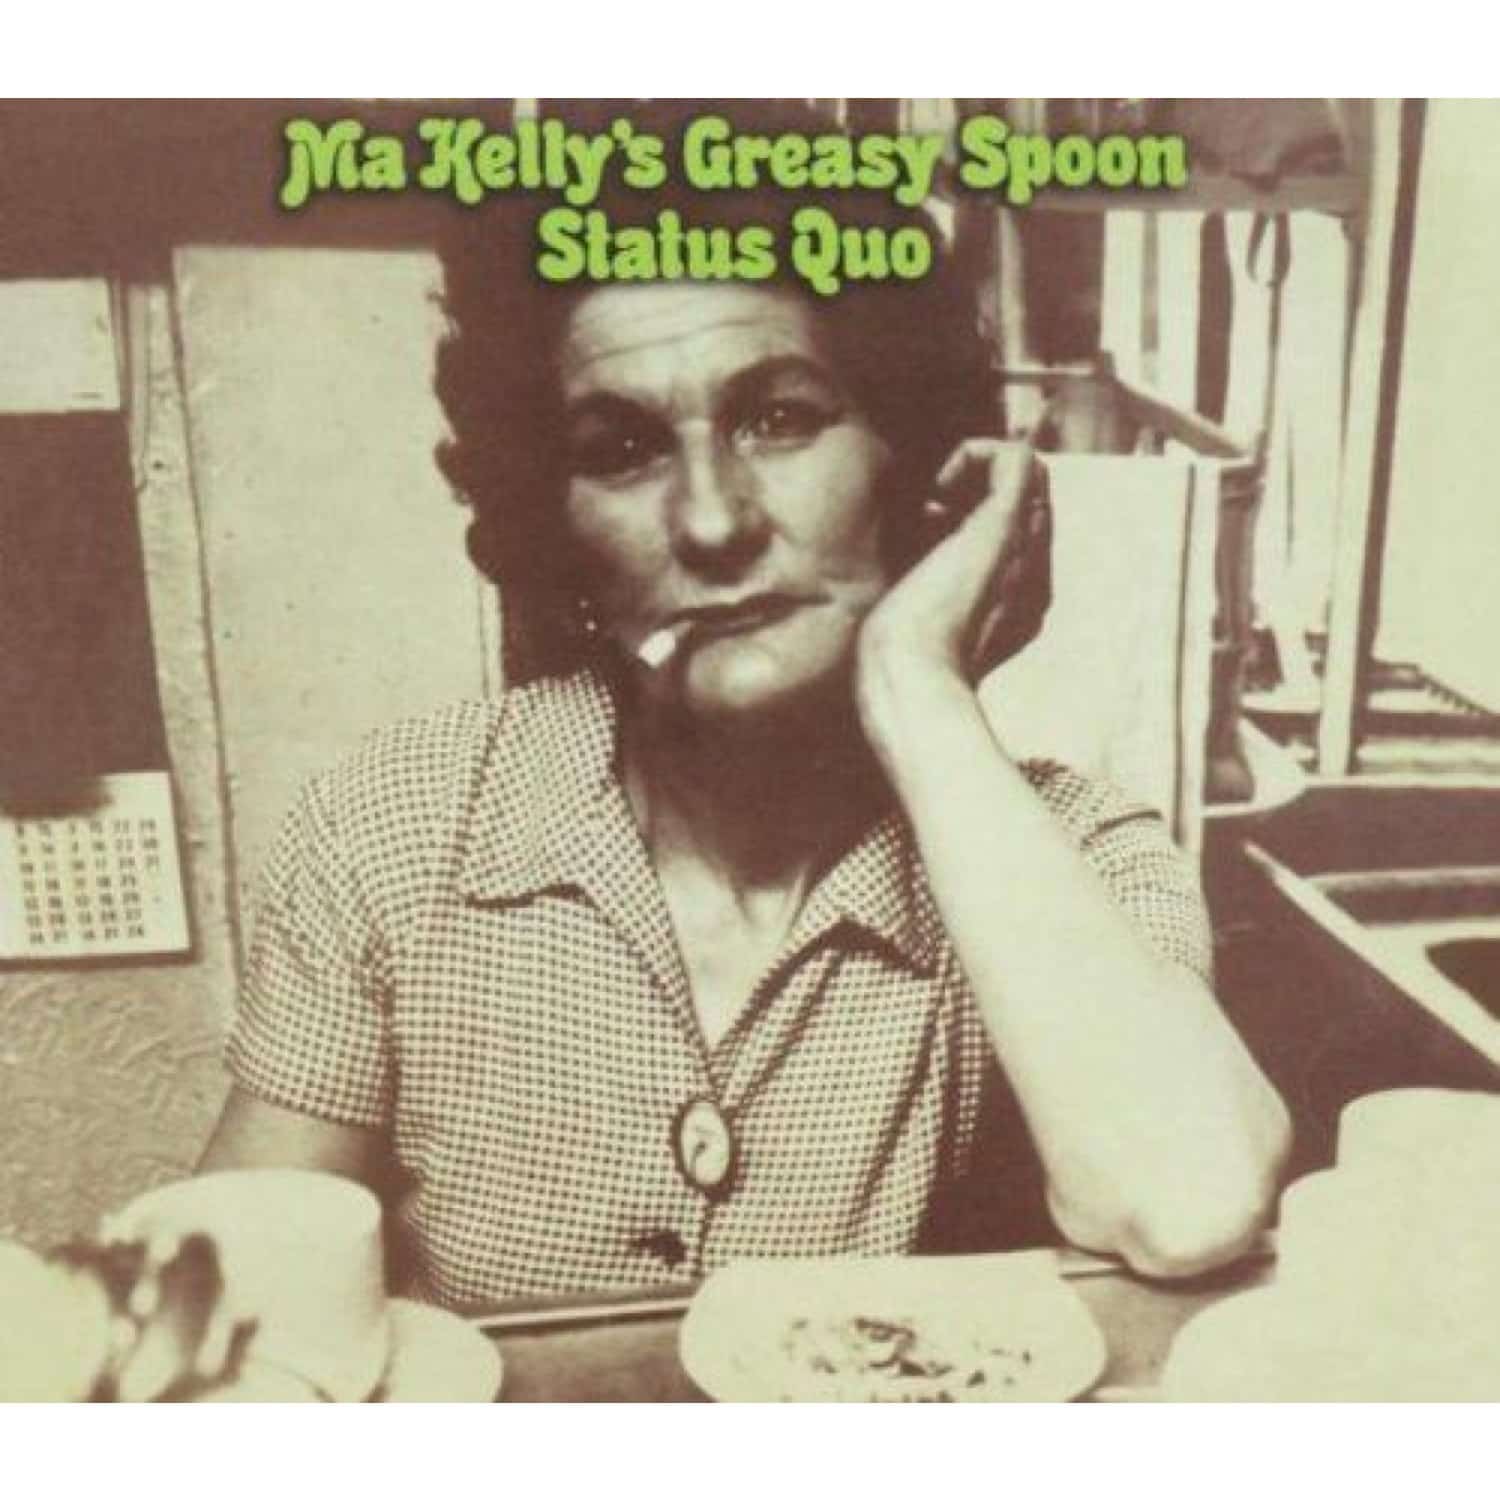 Status Quo - MA KELLY S GREASY SPOON 